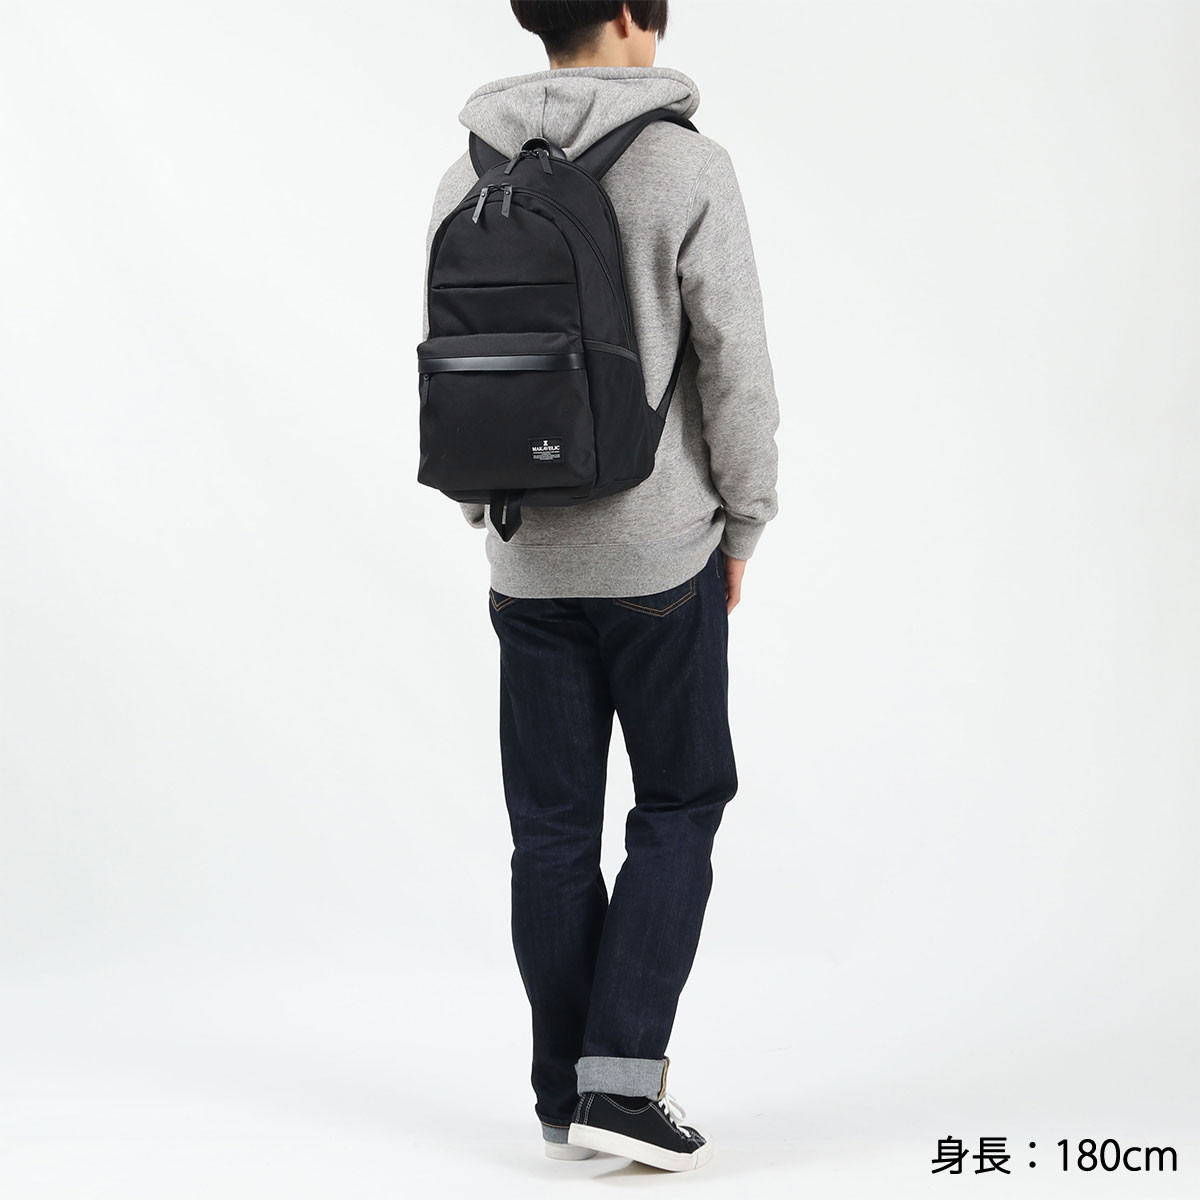 MAKAVELIC マキャベリック CHASE SHUTTLE 2 DAYPACK 3121-10104